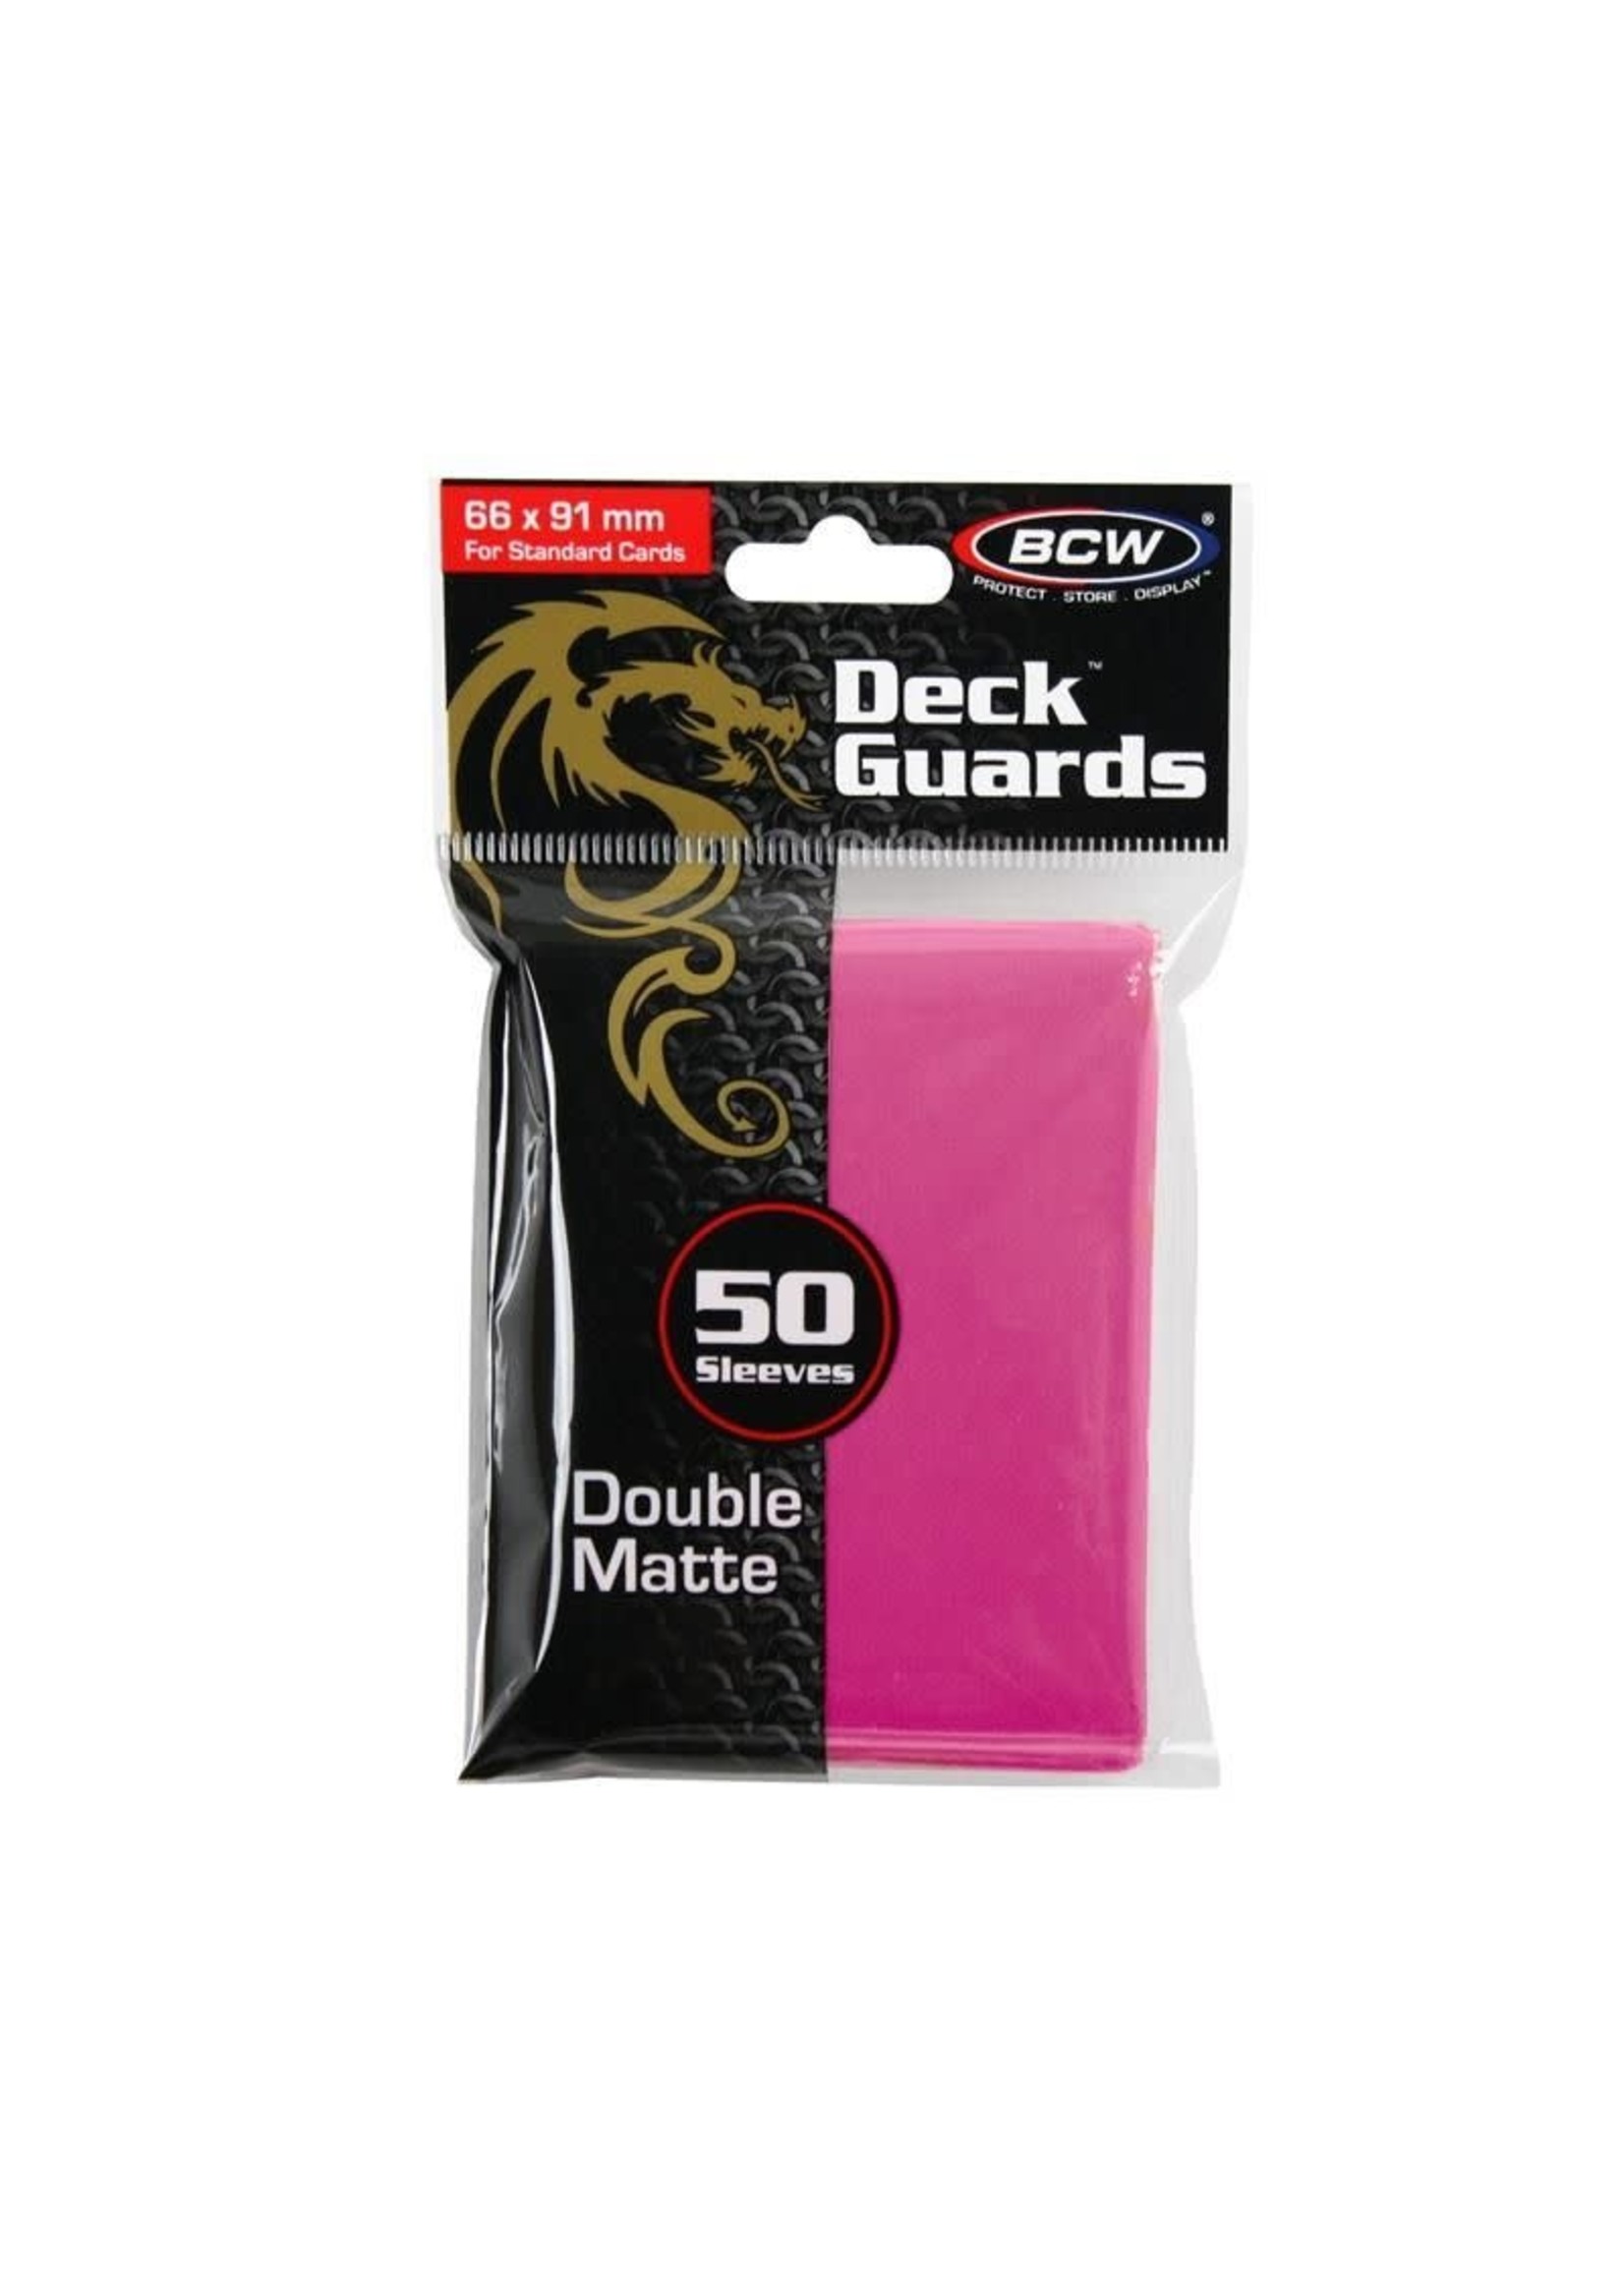 BCW BCW 50 CARD DECK GUARD SLEEVES PINK